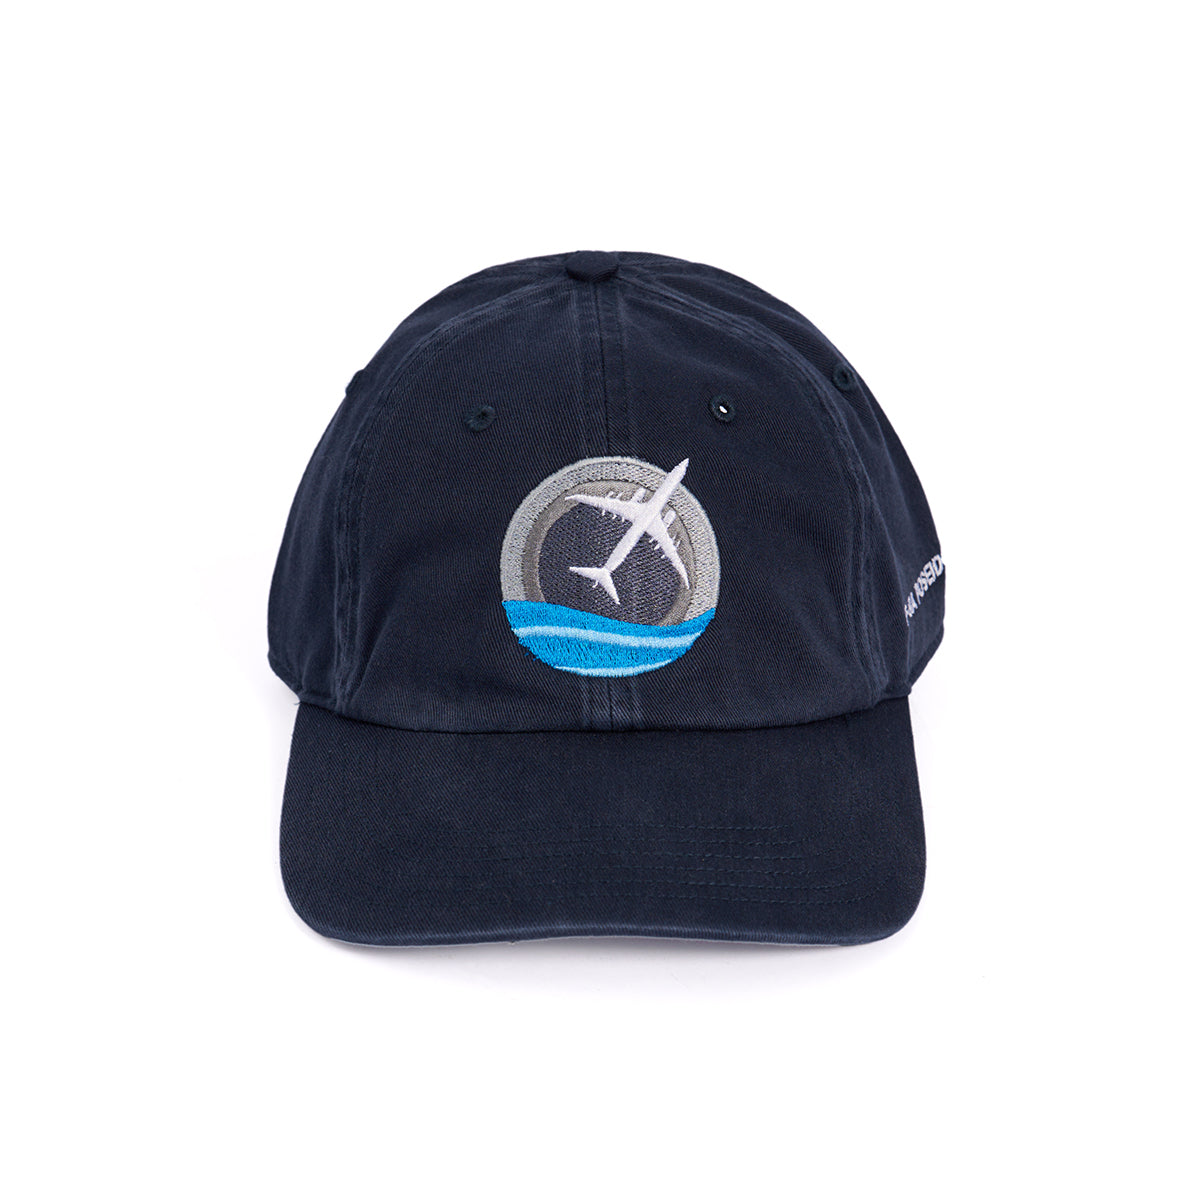 Skyward hat, featuring the iconic Boeing P-8 Poseidon embroidered in a roundel design on the front.